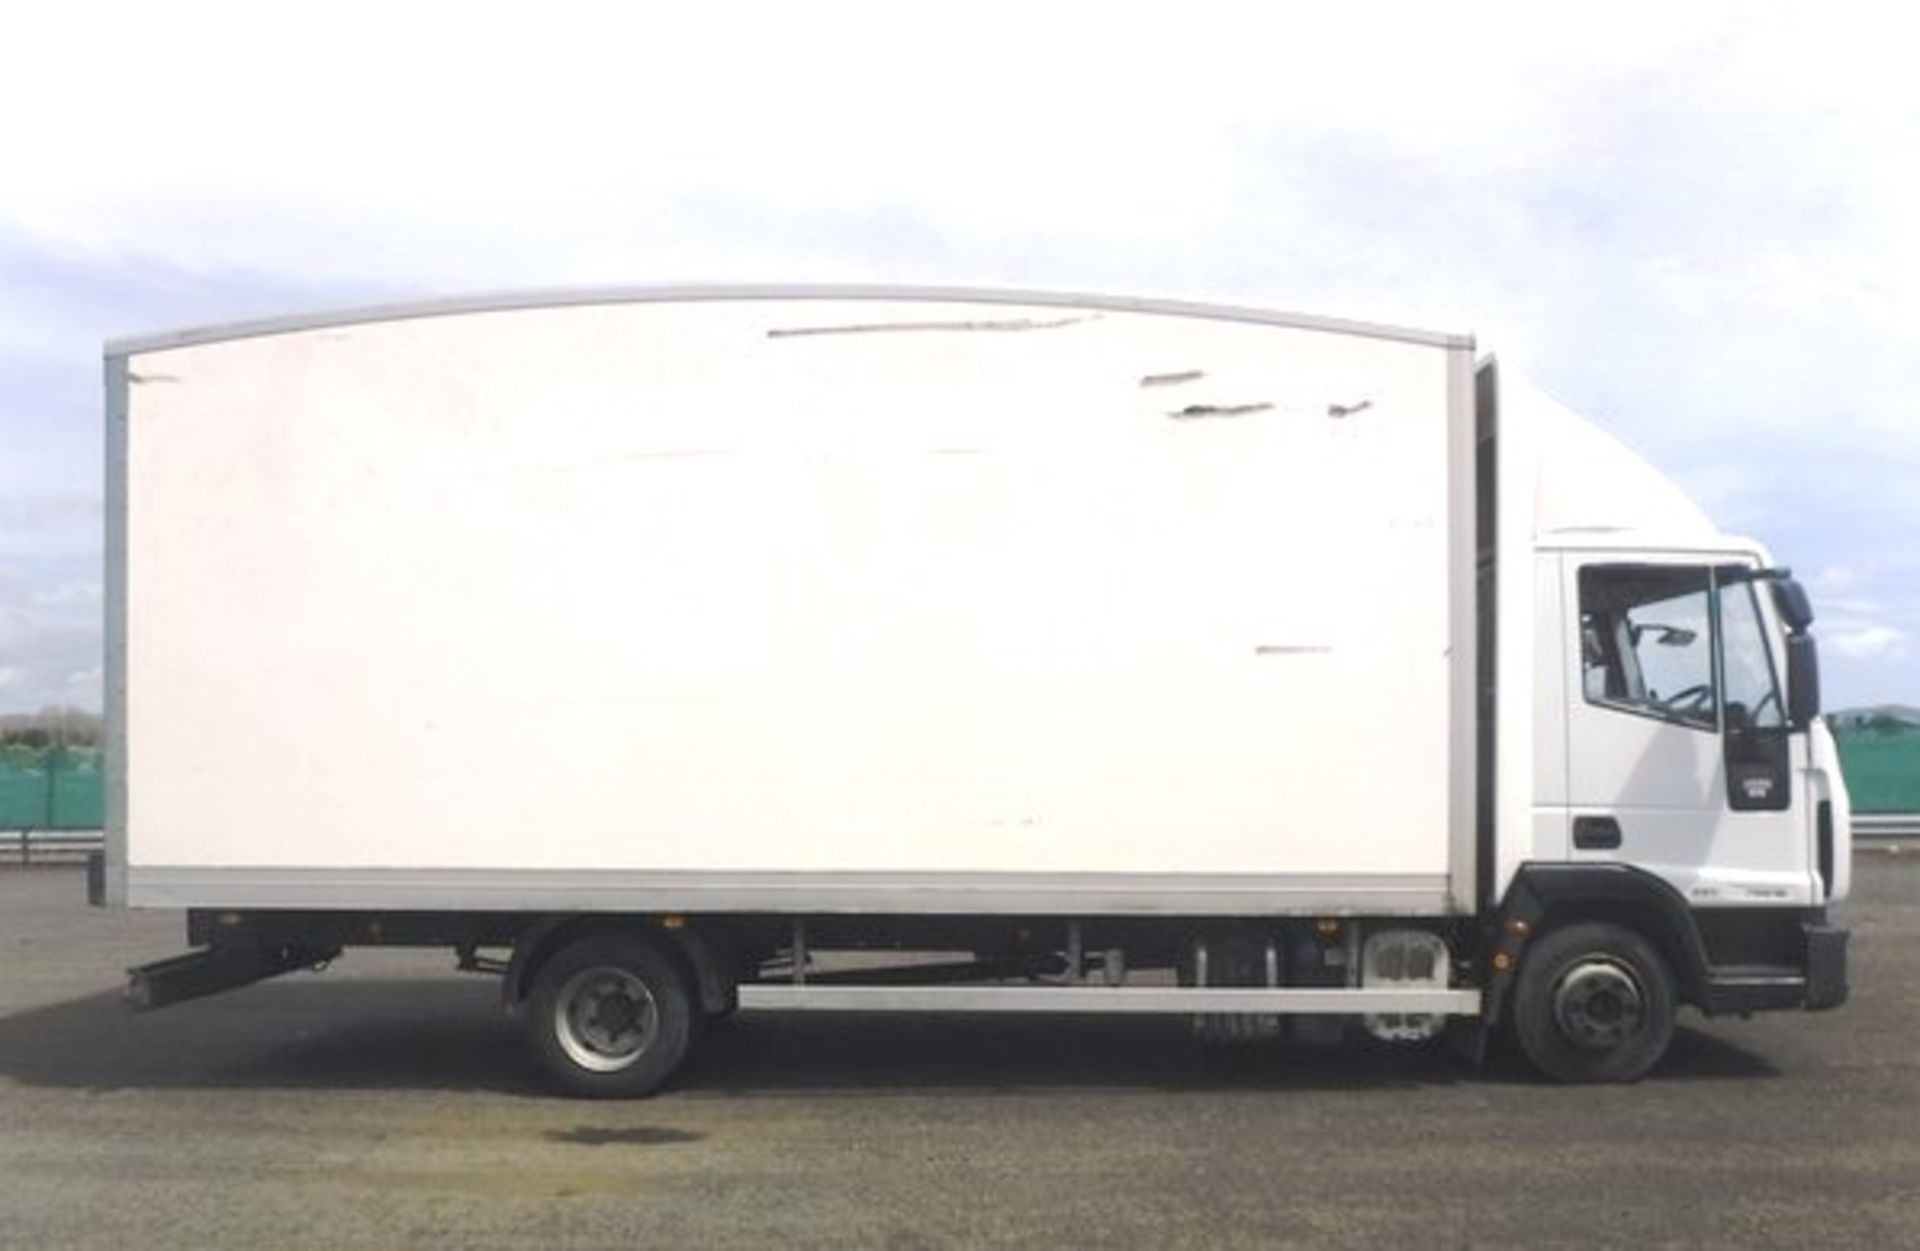 IVECO MODEL EUROCARGO (MY 2008) - 3920cc - Image 7 of 27